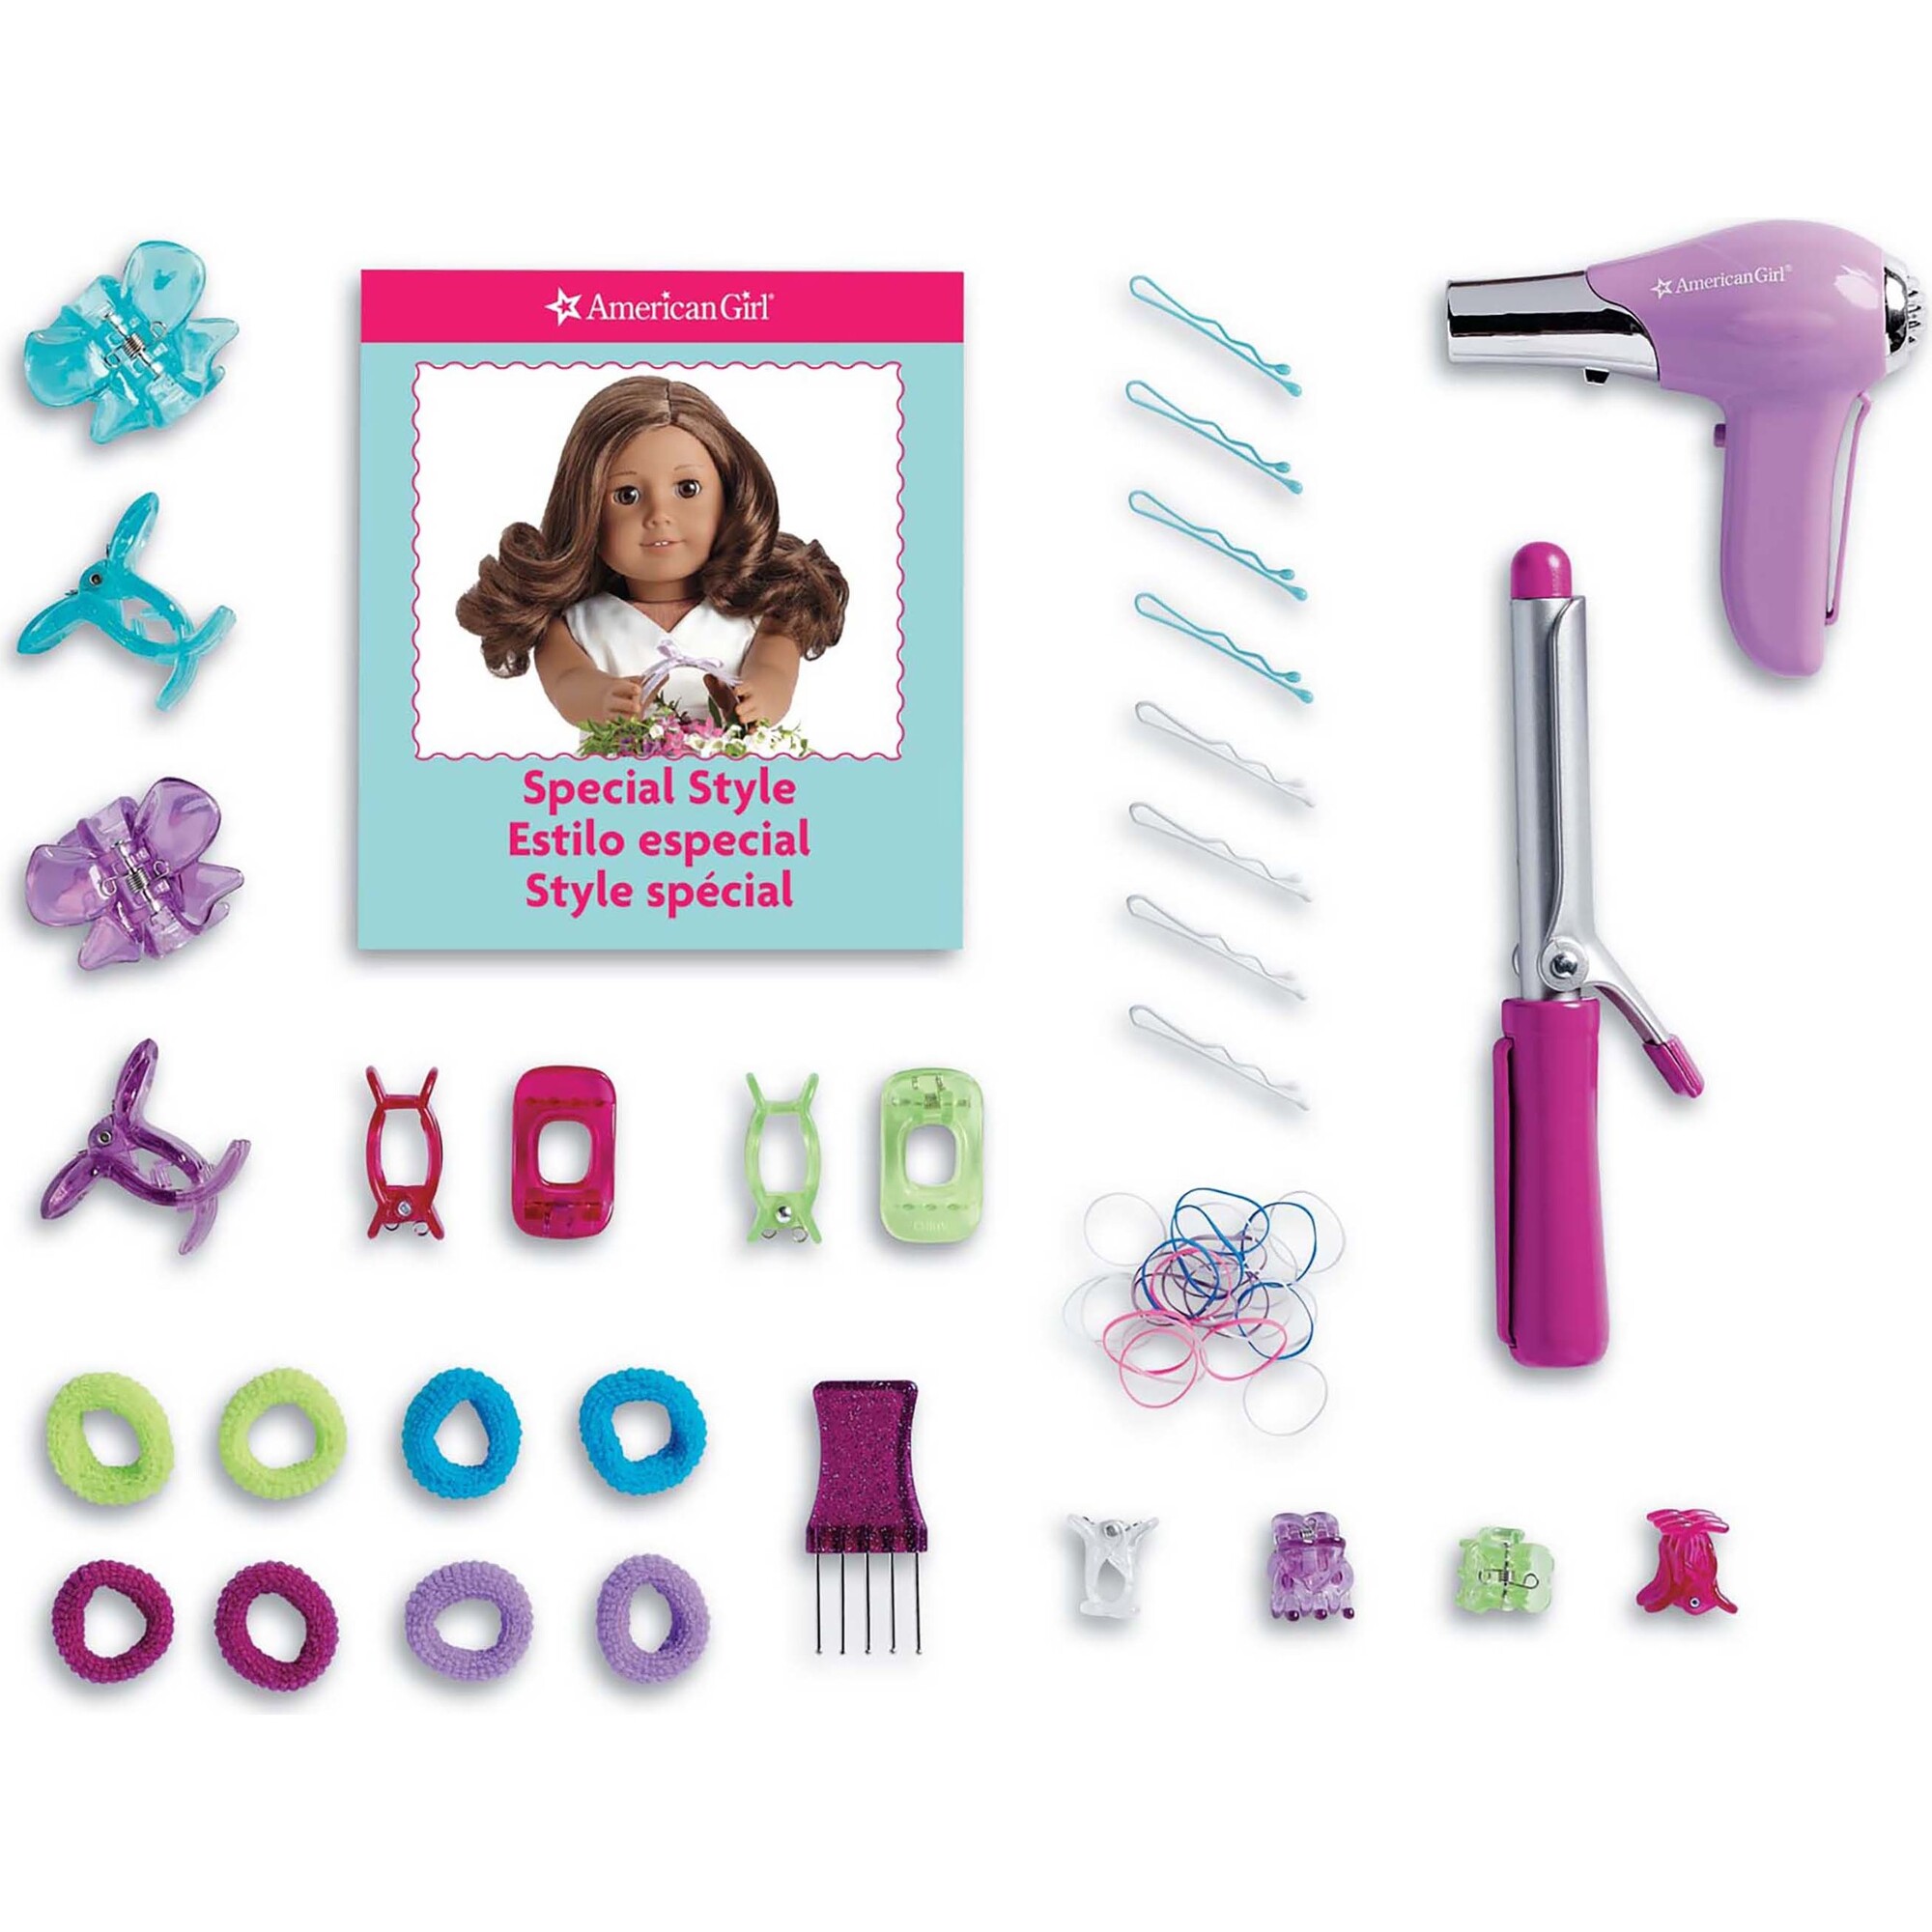 Truly Blue Hairstyling Caddy - American Girl Dolls & Doll Accessories